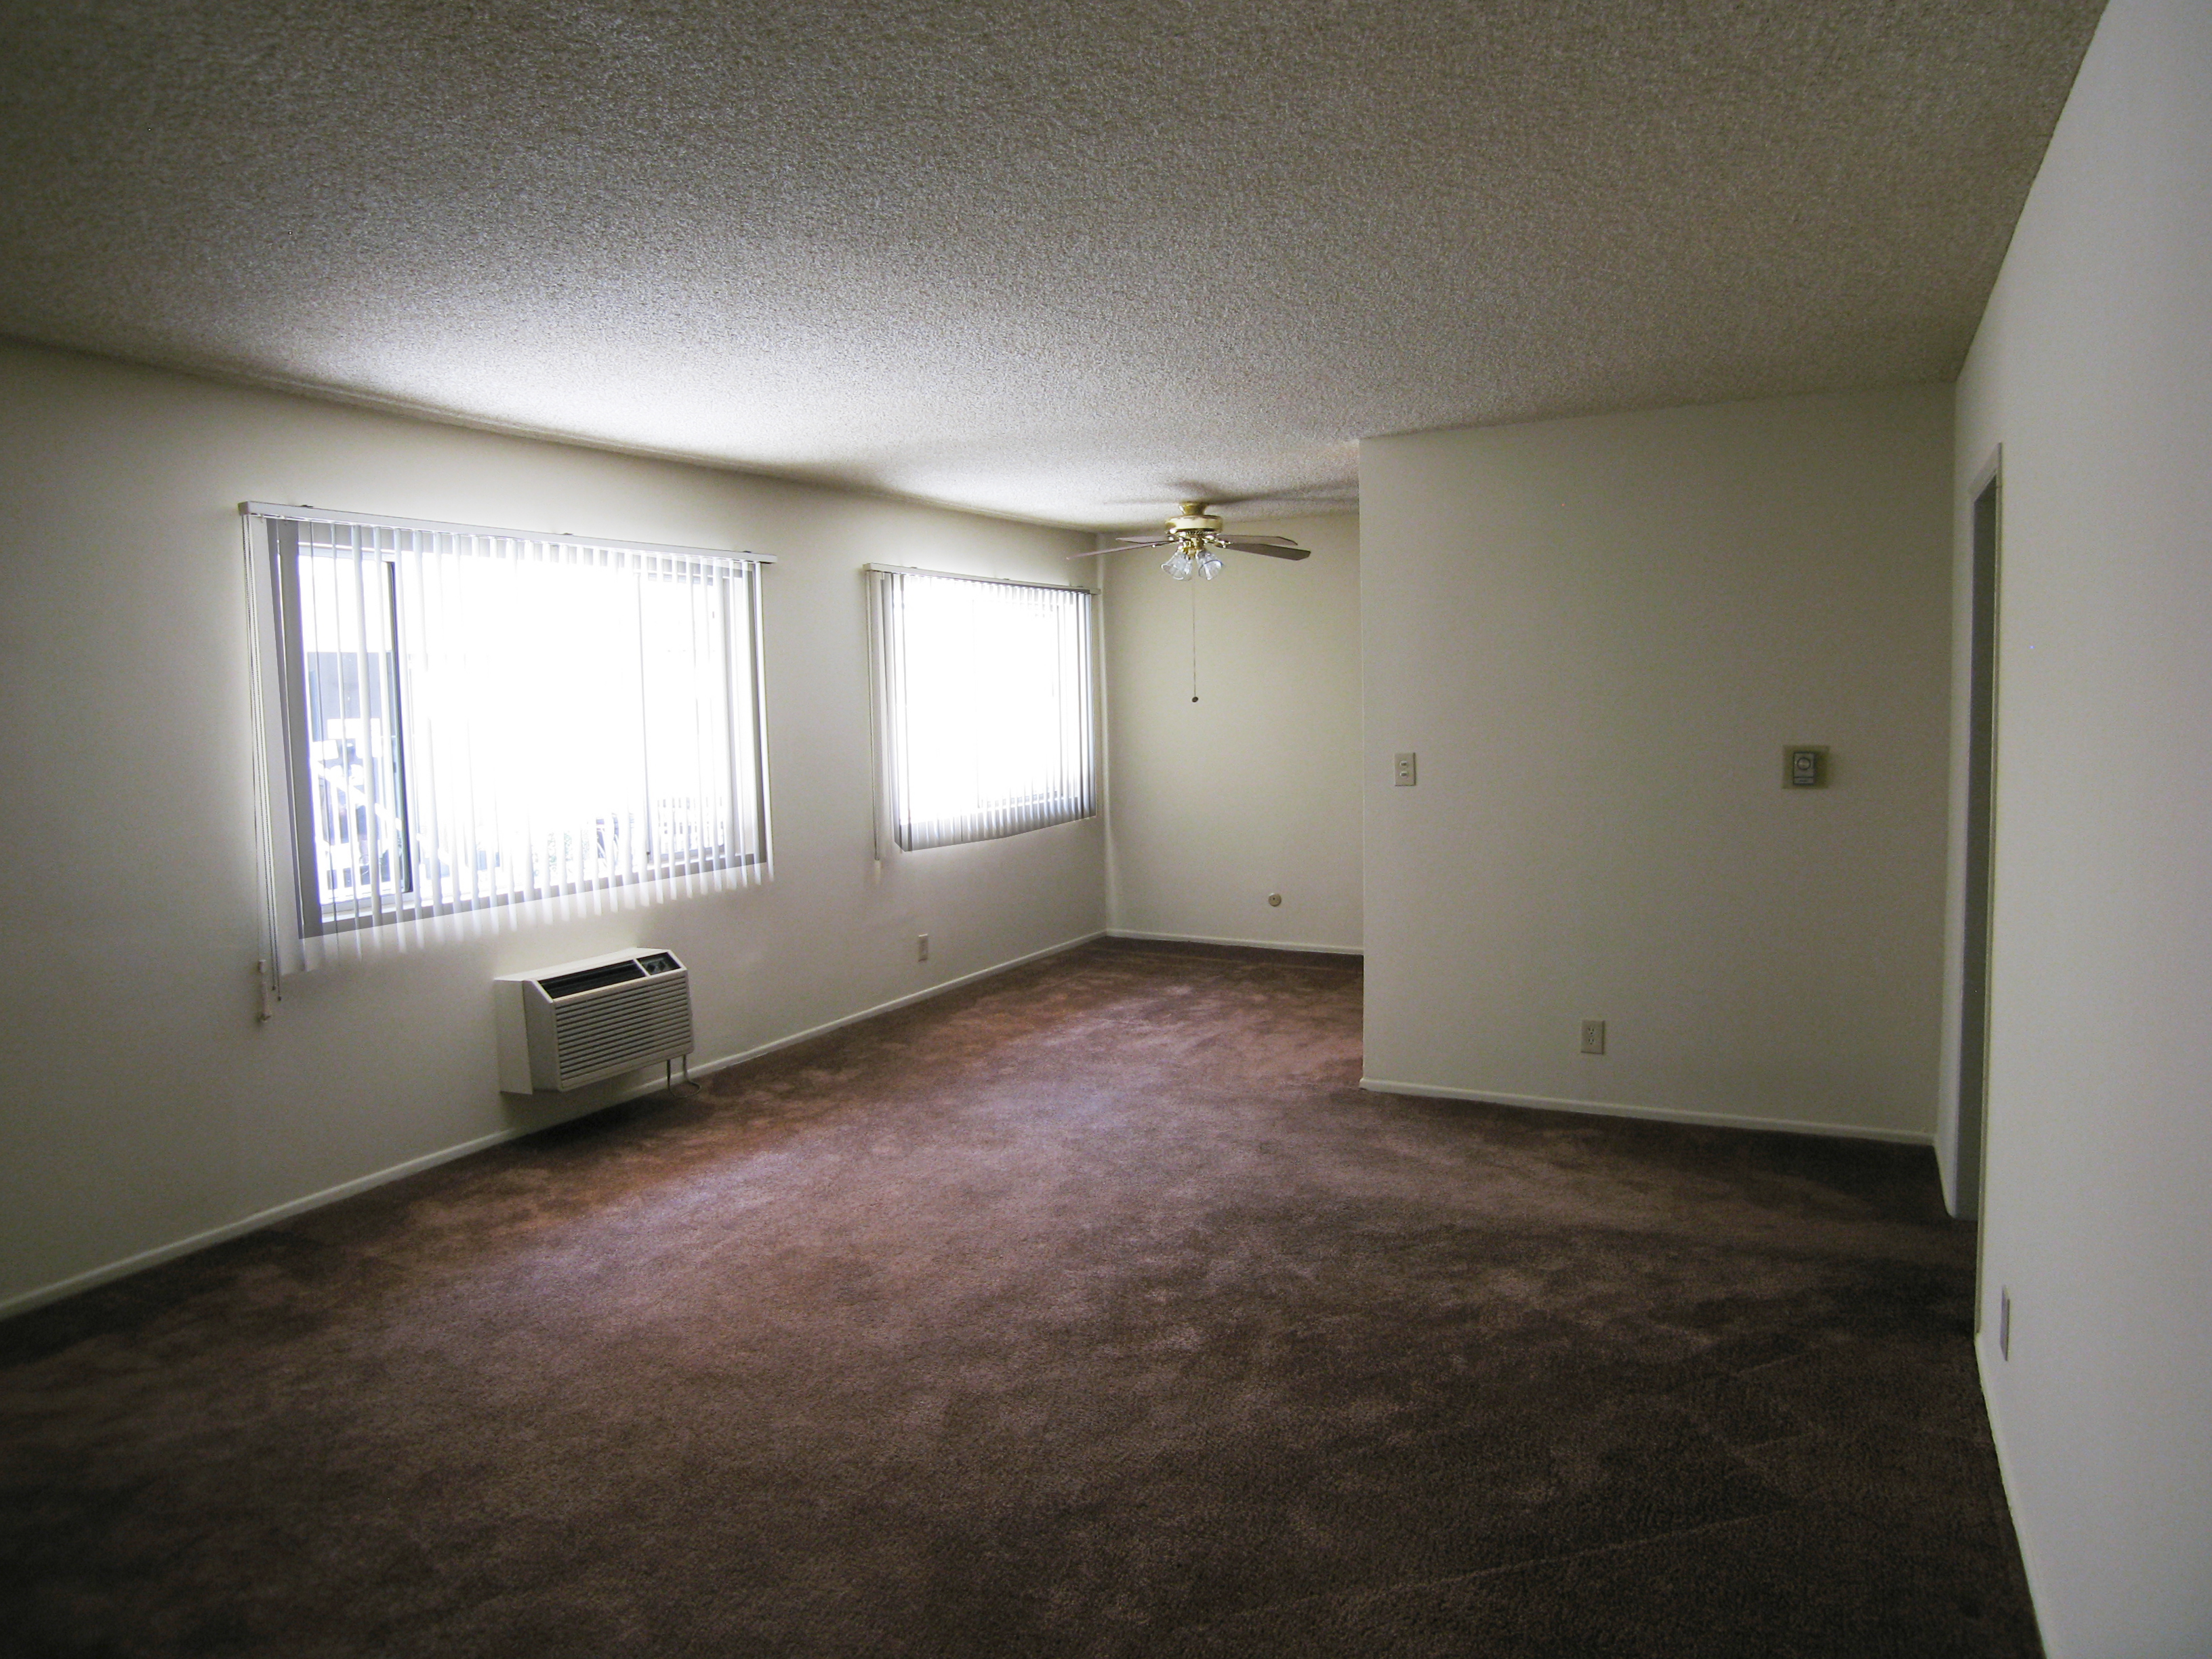 Image of the apartment living room